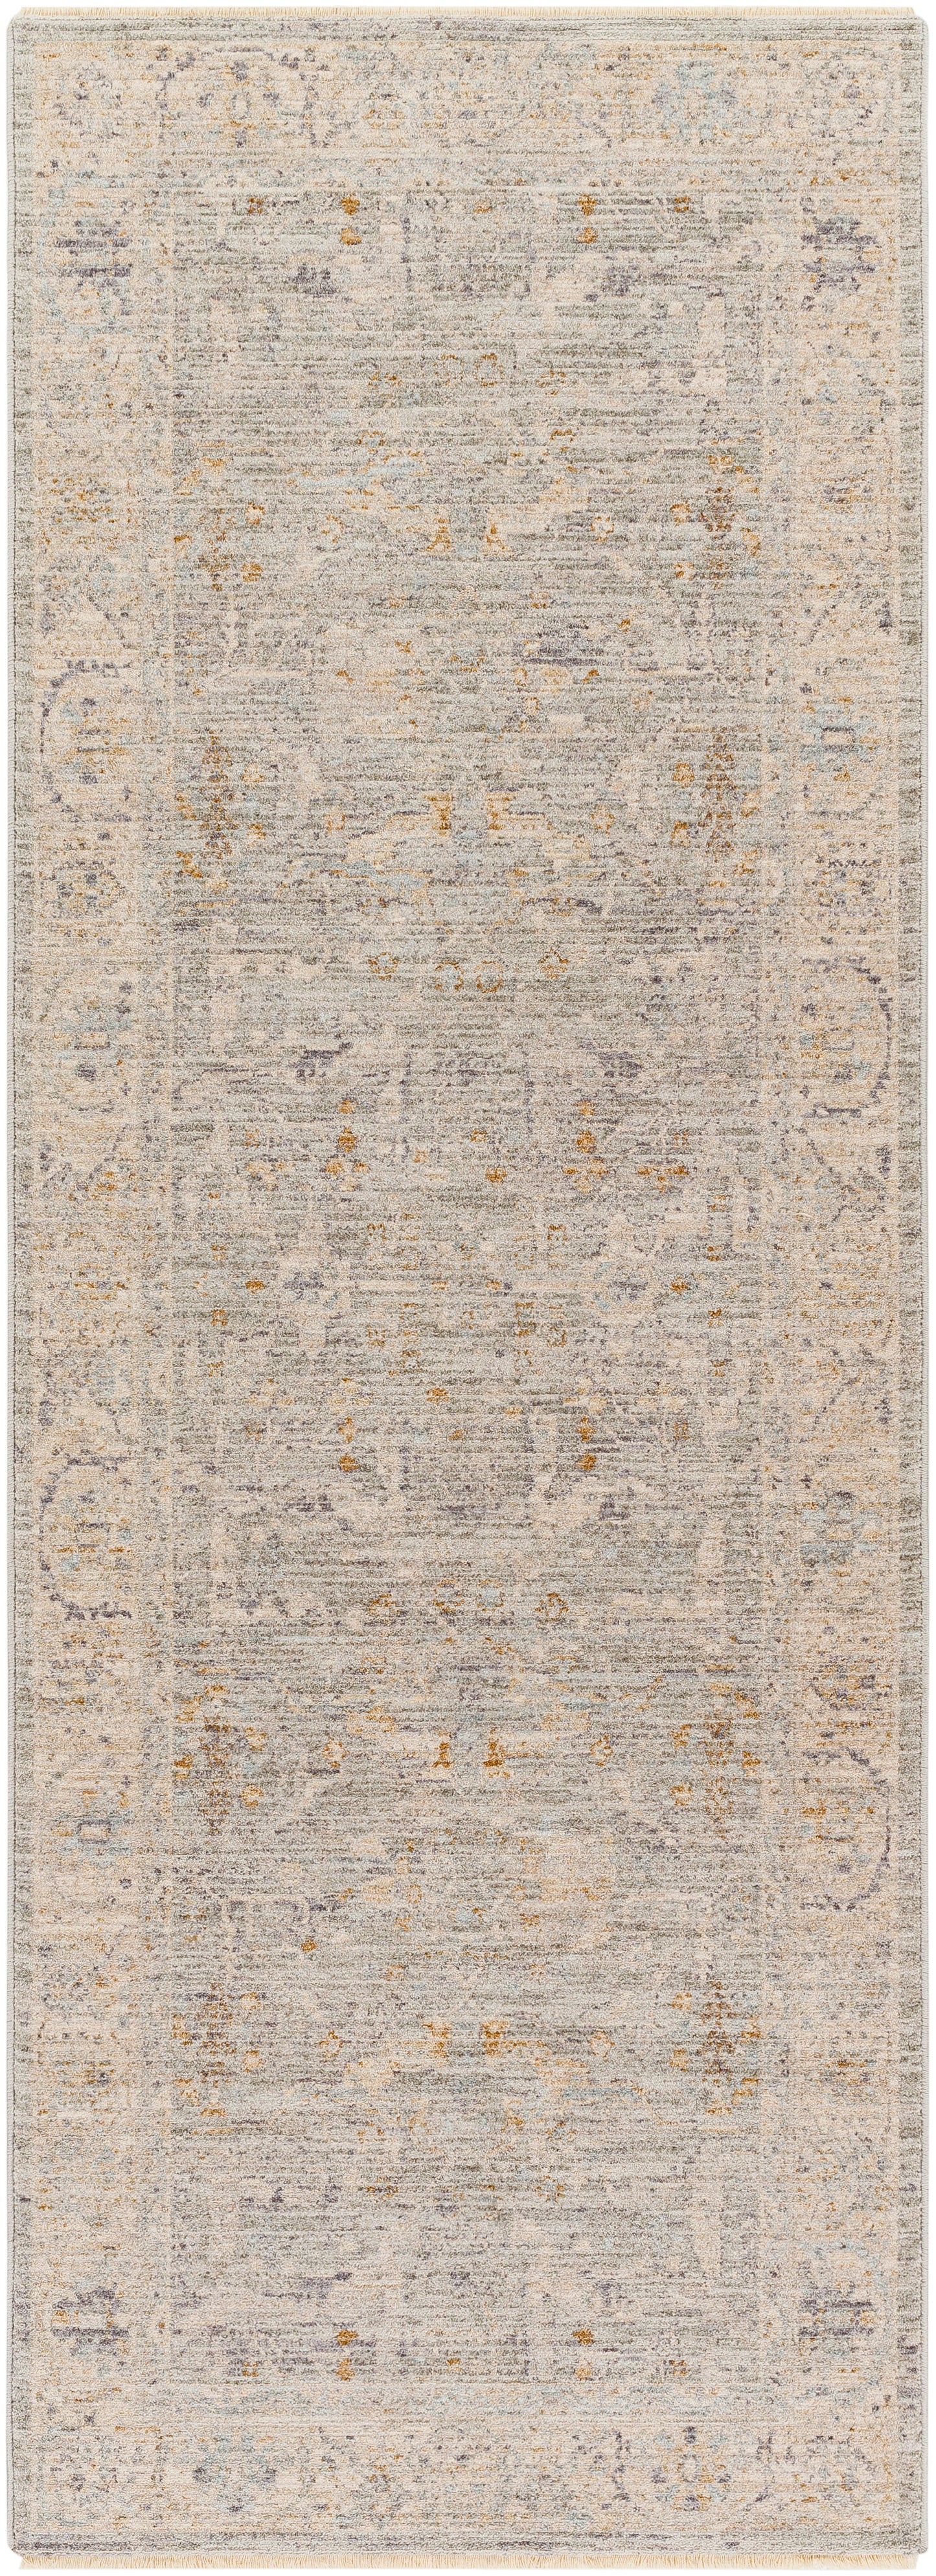 Avant Garde 30986 Machine Woven Synthetic Blend Indoor Area Rug by Surya Rugs